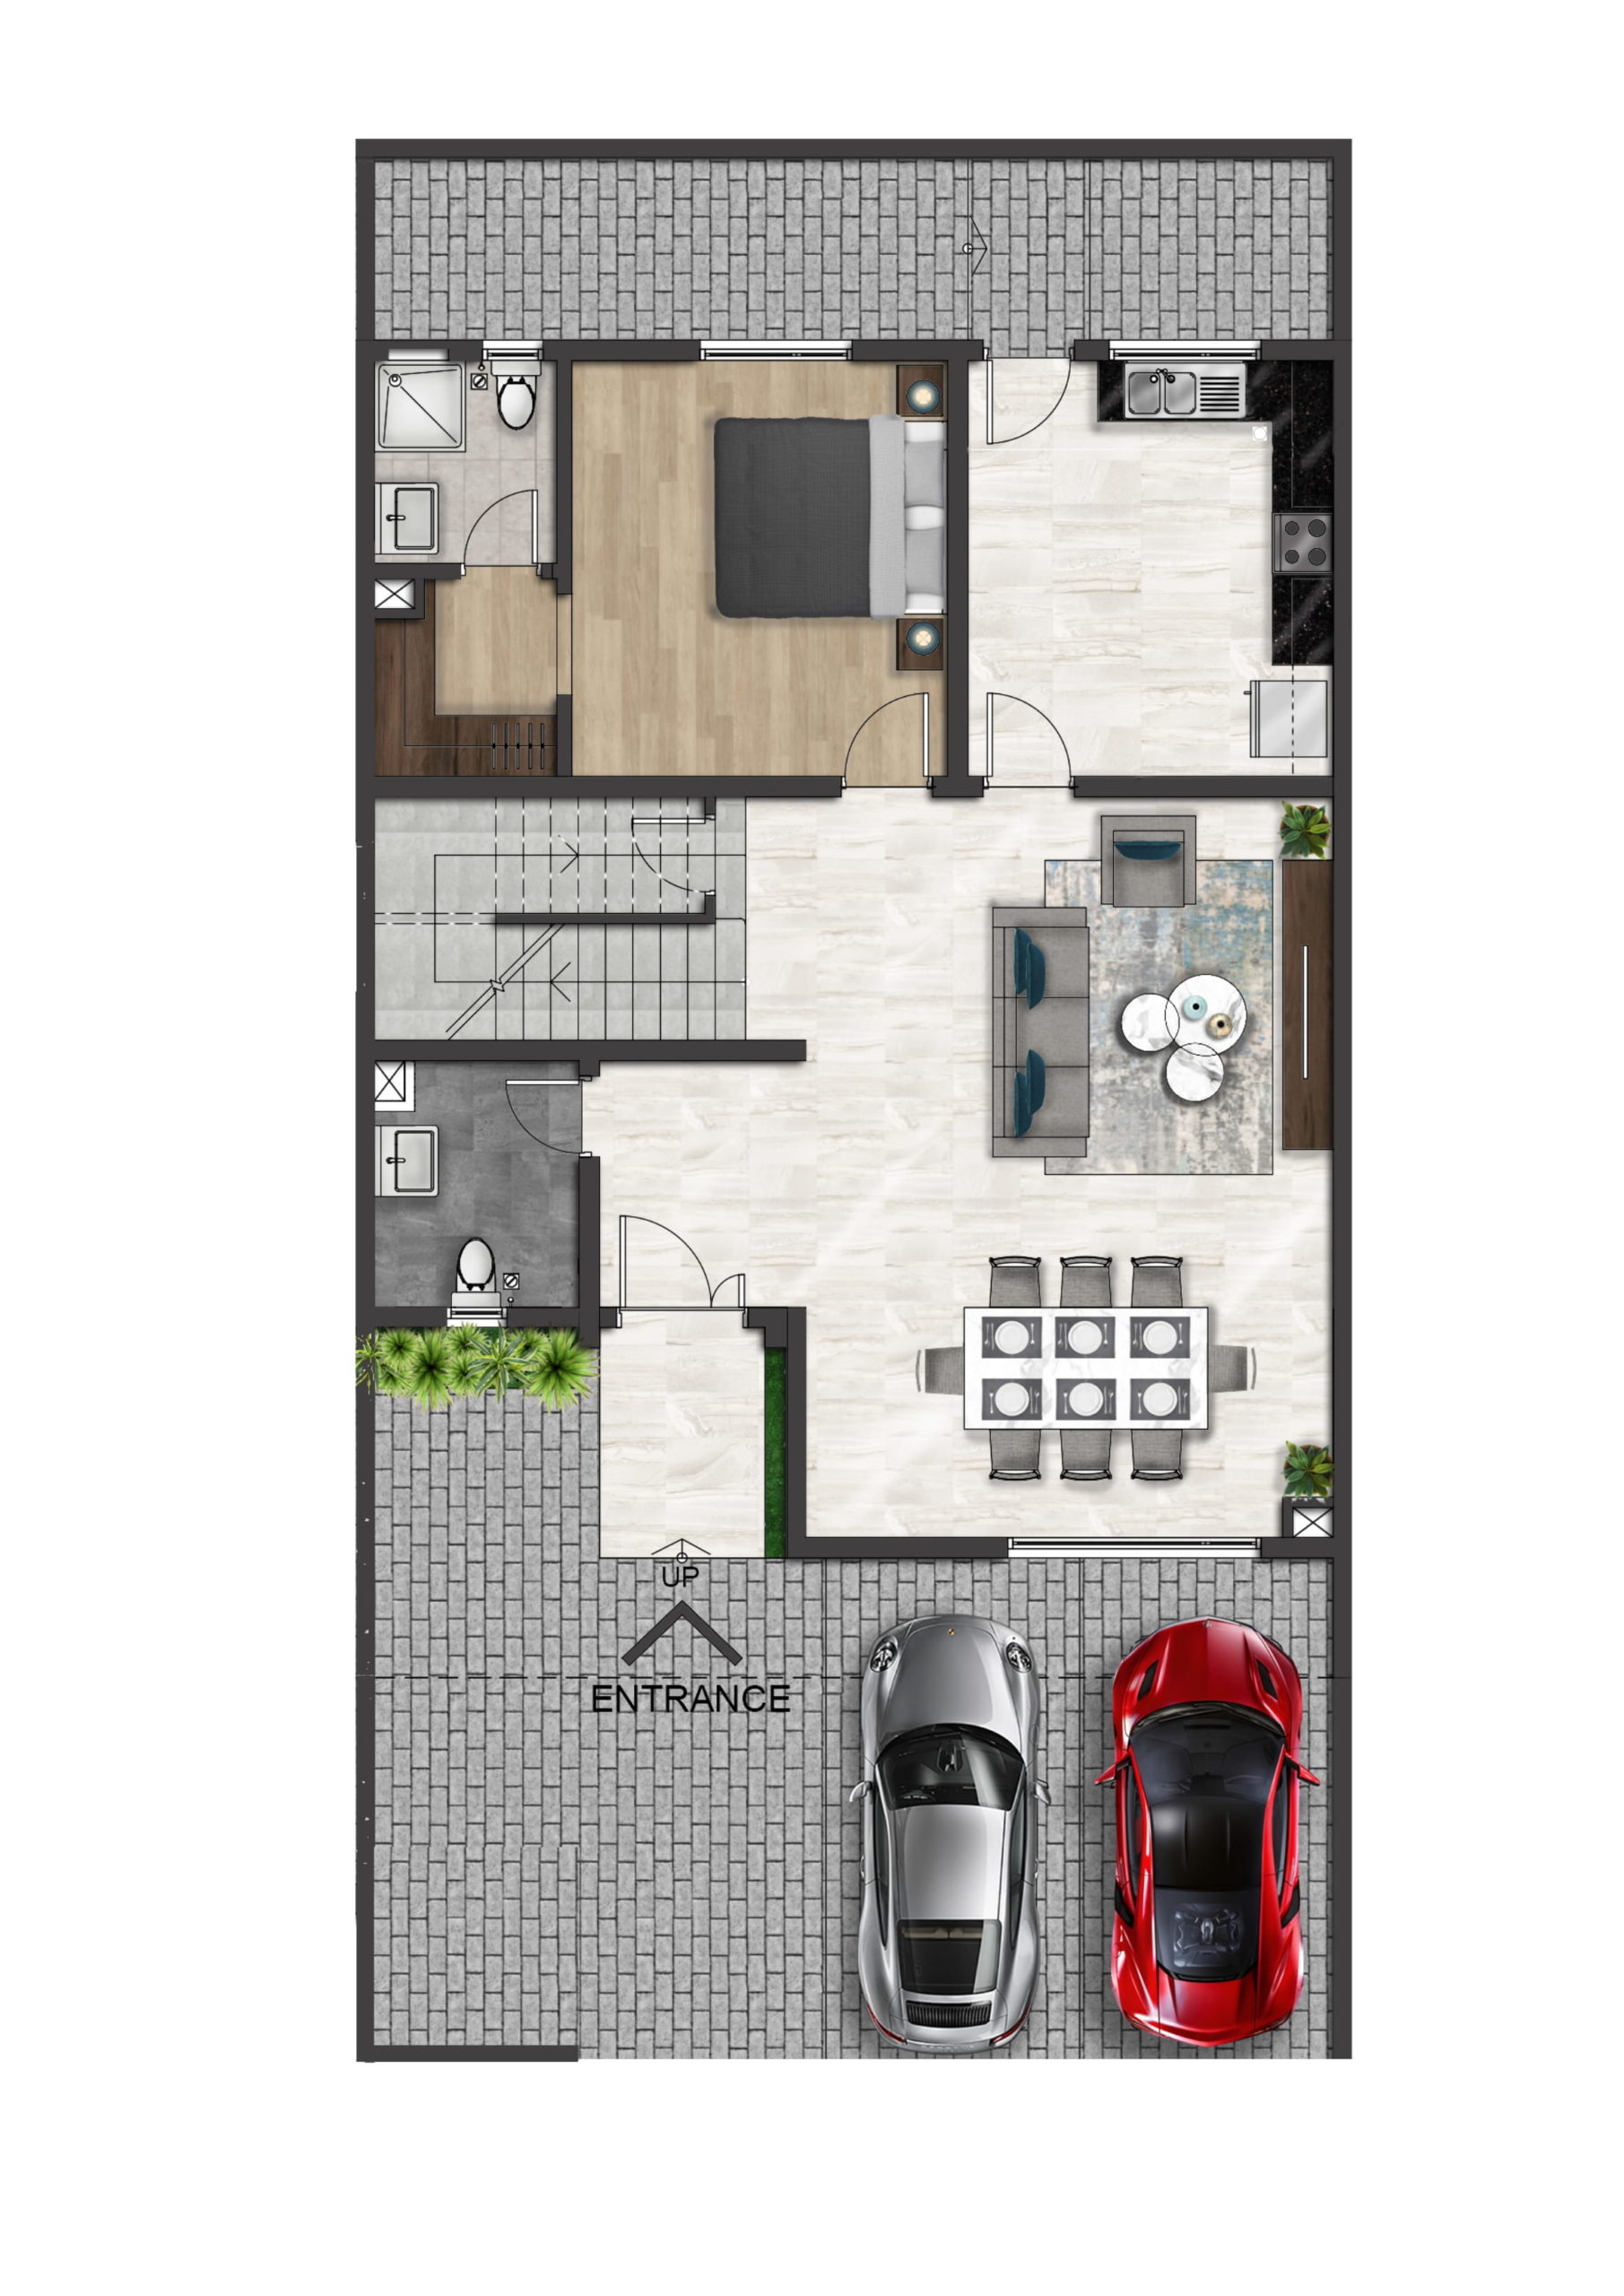 A floor plan of a Al Rawdha house with two cars and a garage.